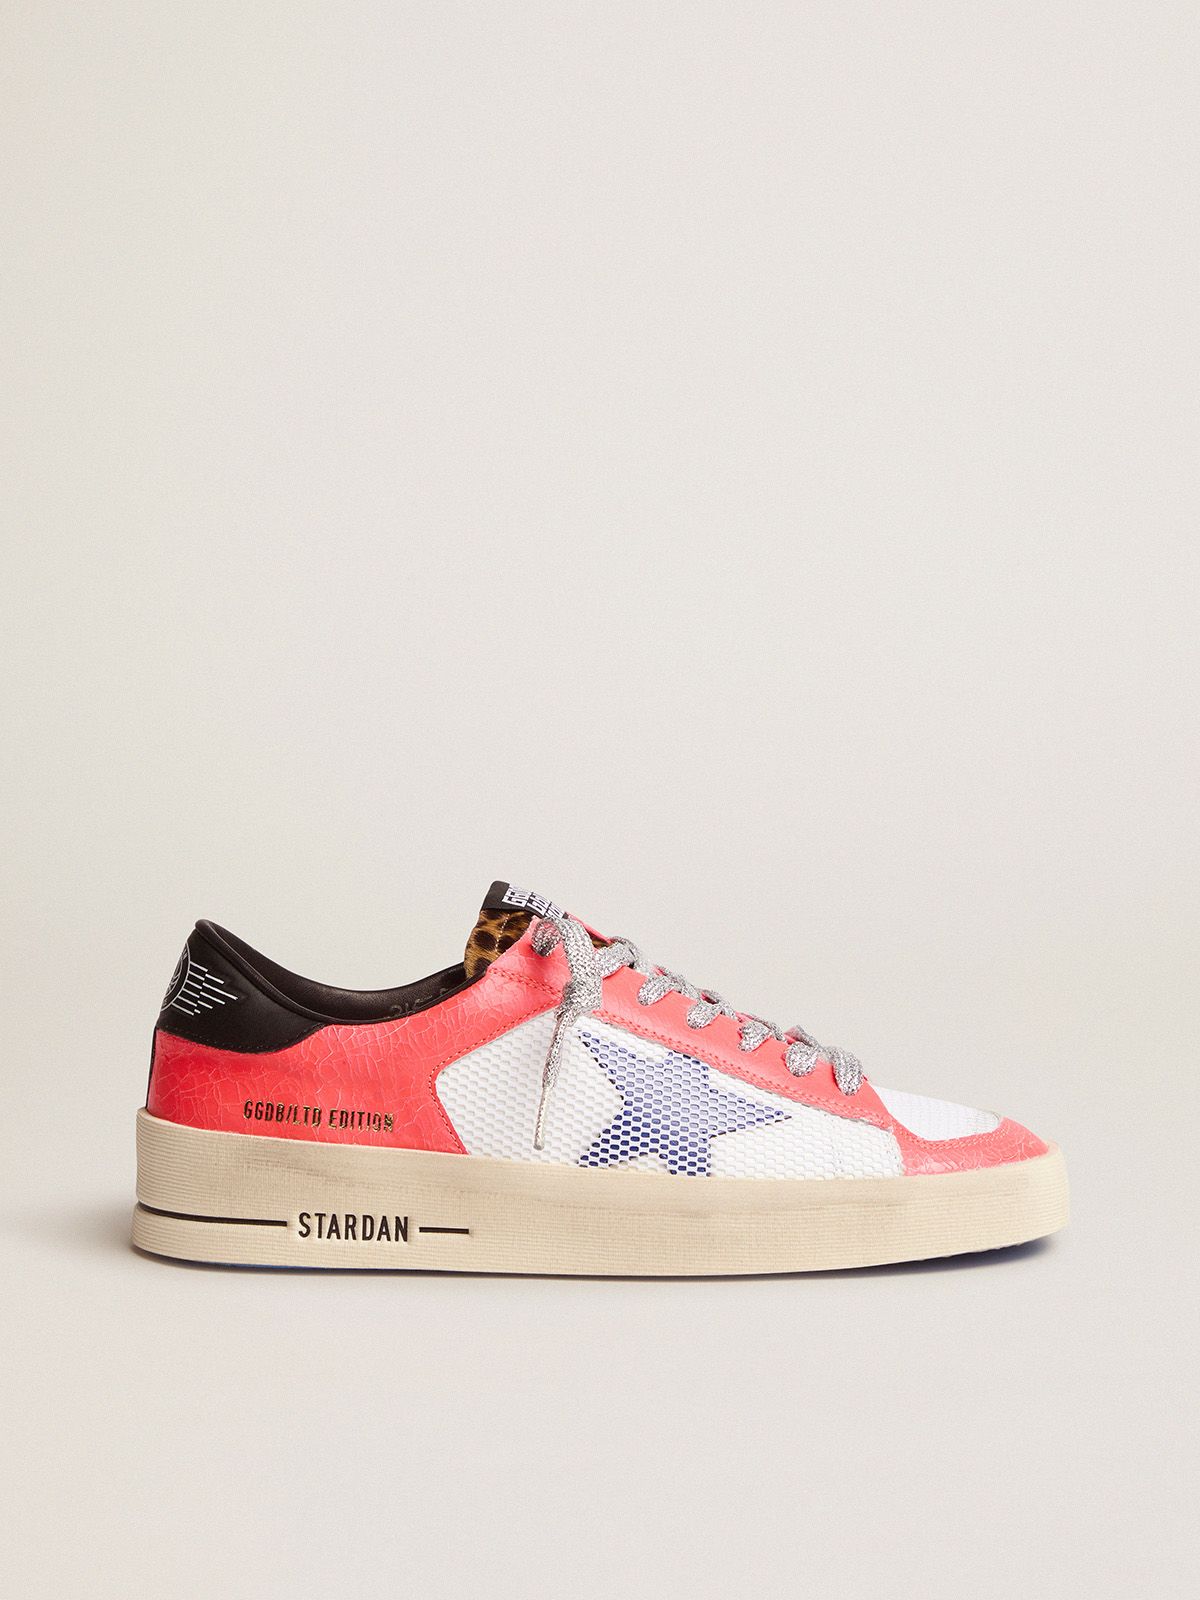 Golden Goose Saldi Uomo Women's LAB Limited Edition Stardan sneakers in craquelé leather and pony skin